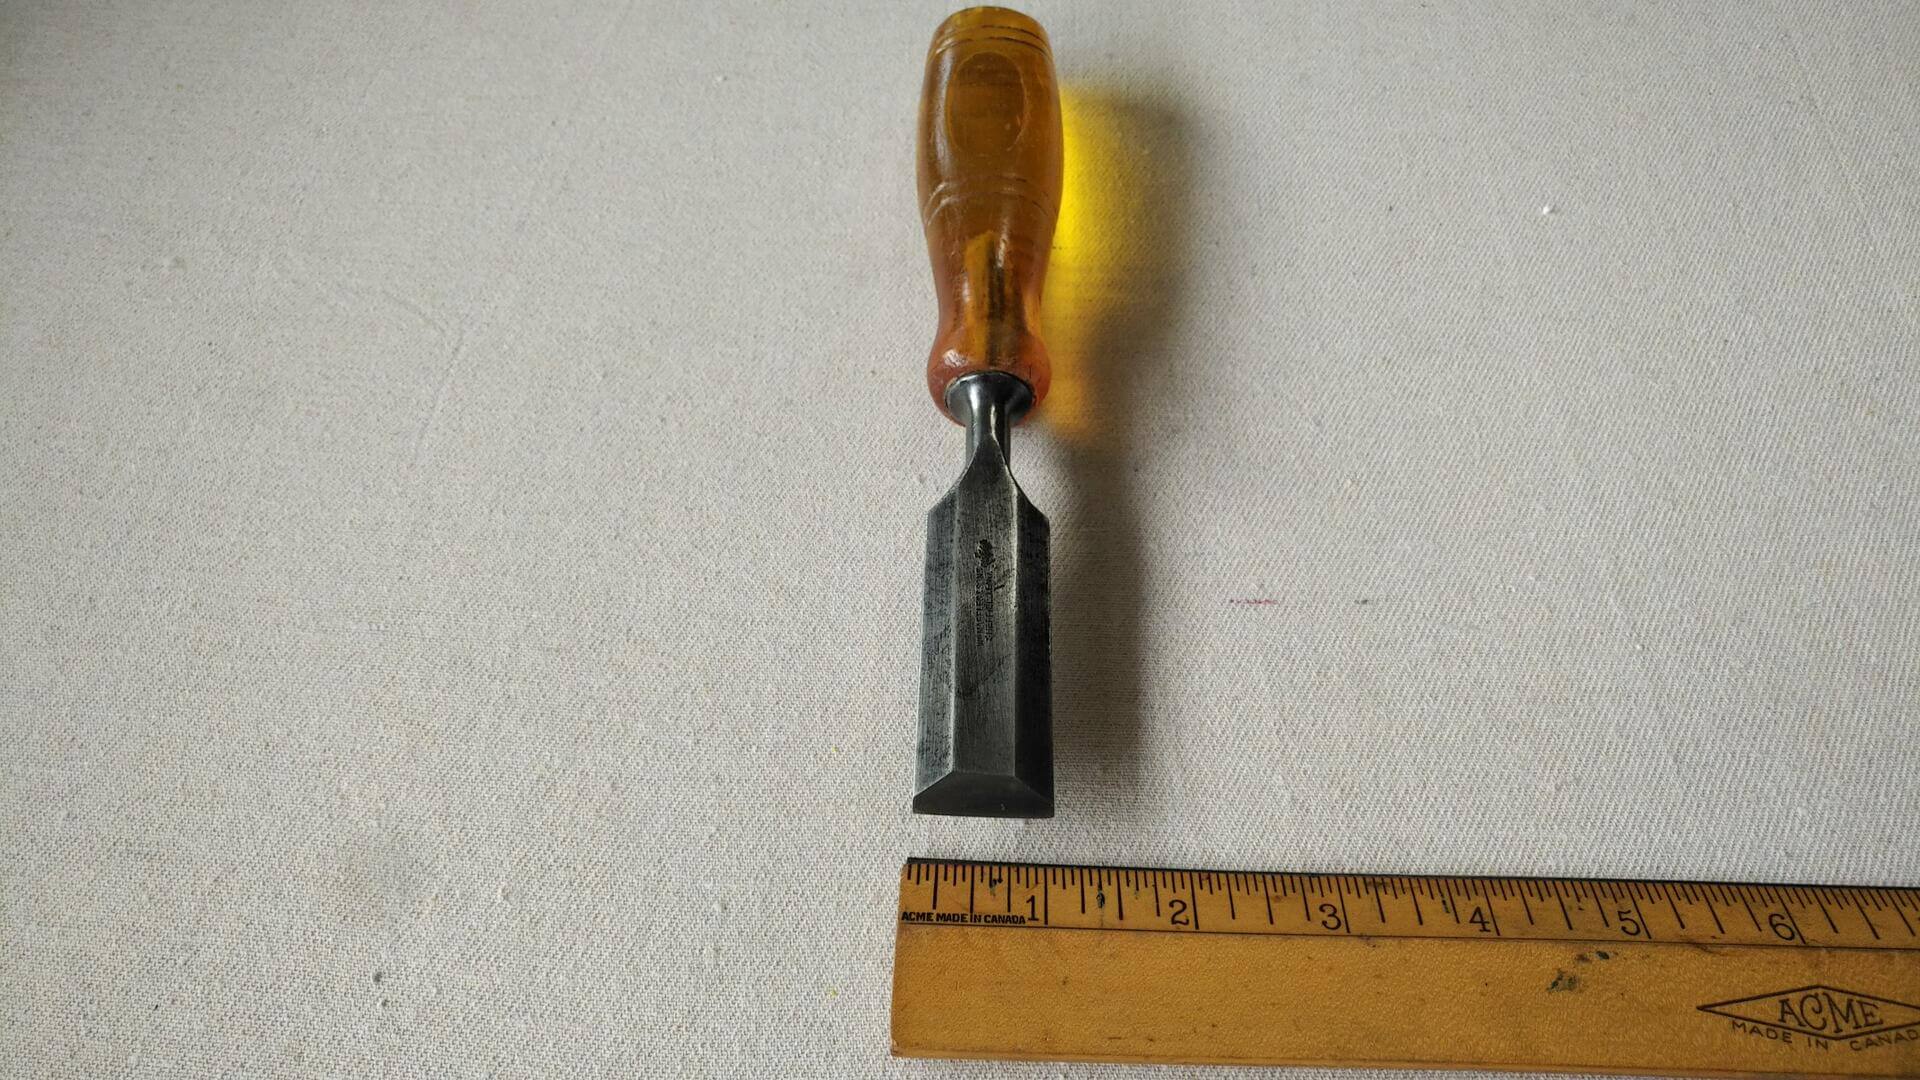 Vintage WM Marples & Sons 1" Shamrock tang chisel w shatterproof handle. Antique made in Sheffield England carpentry and woodworking edge hand tools.